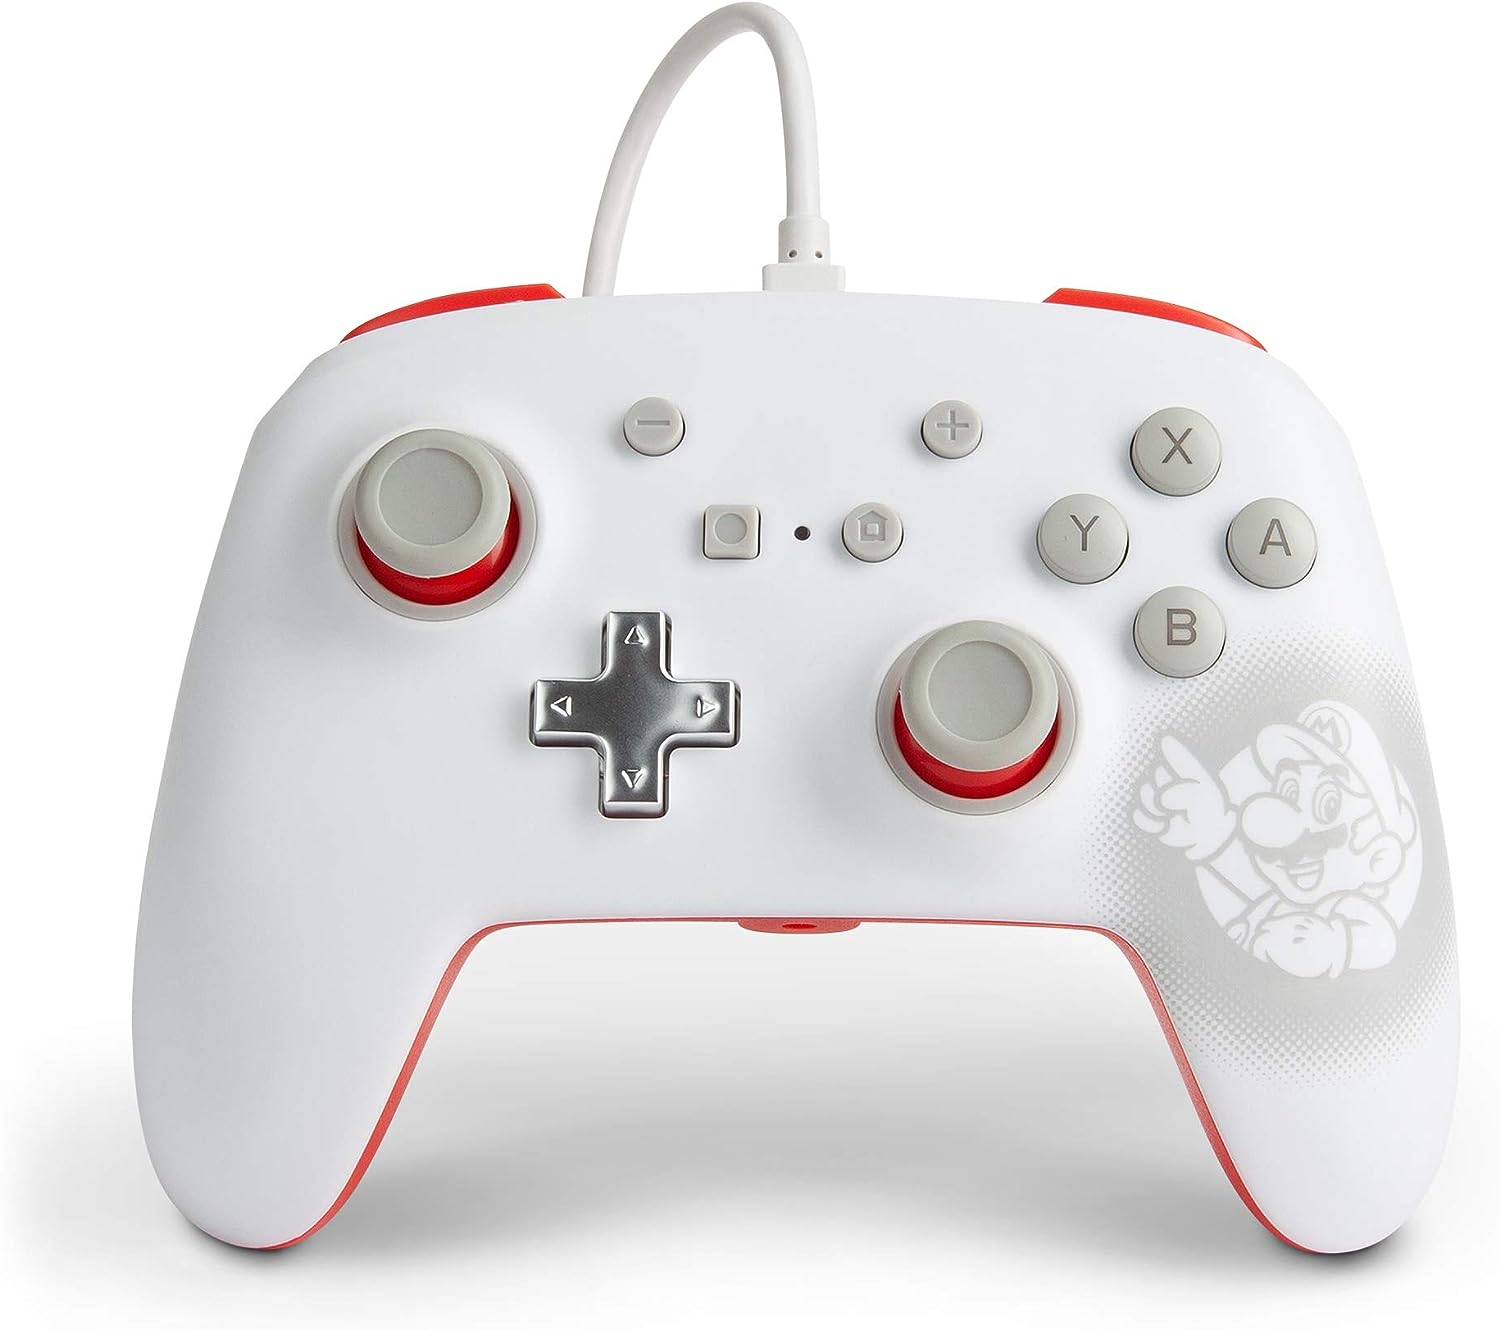 PowerA Mario Enhanced Wired Controller for Nintendo Switch - Red/White